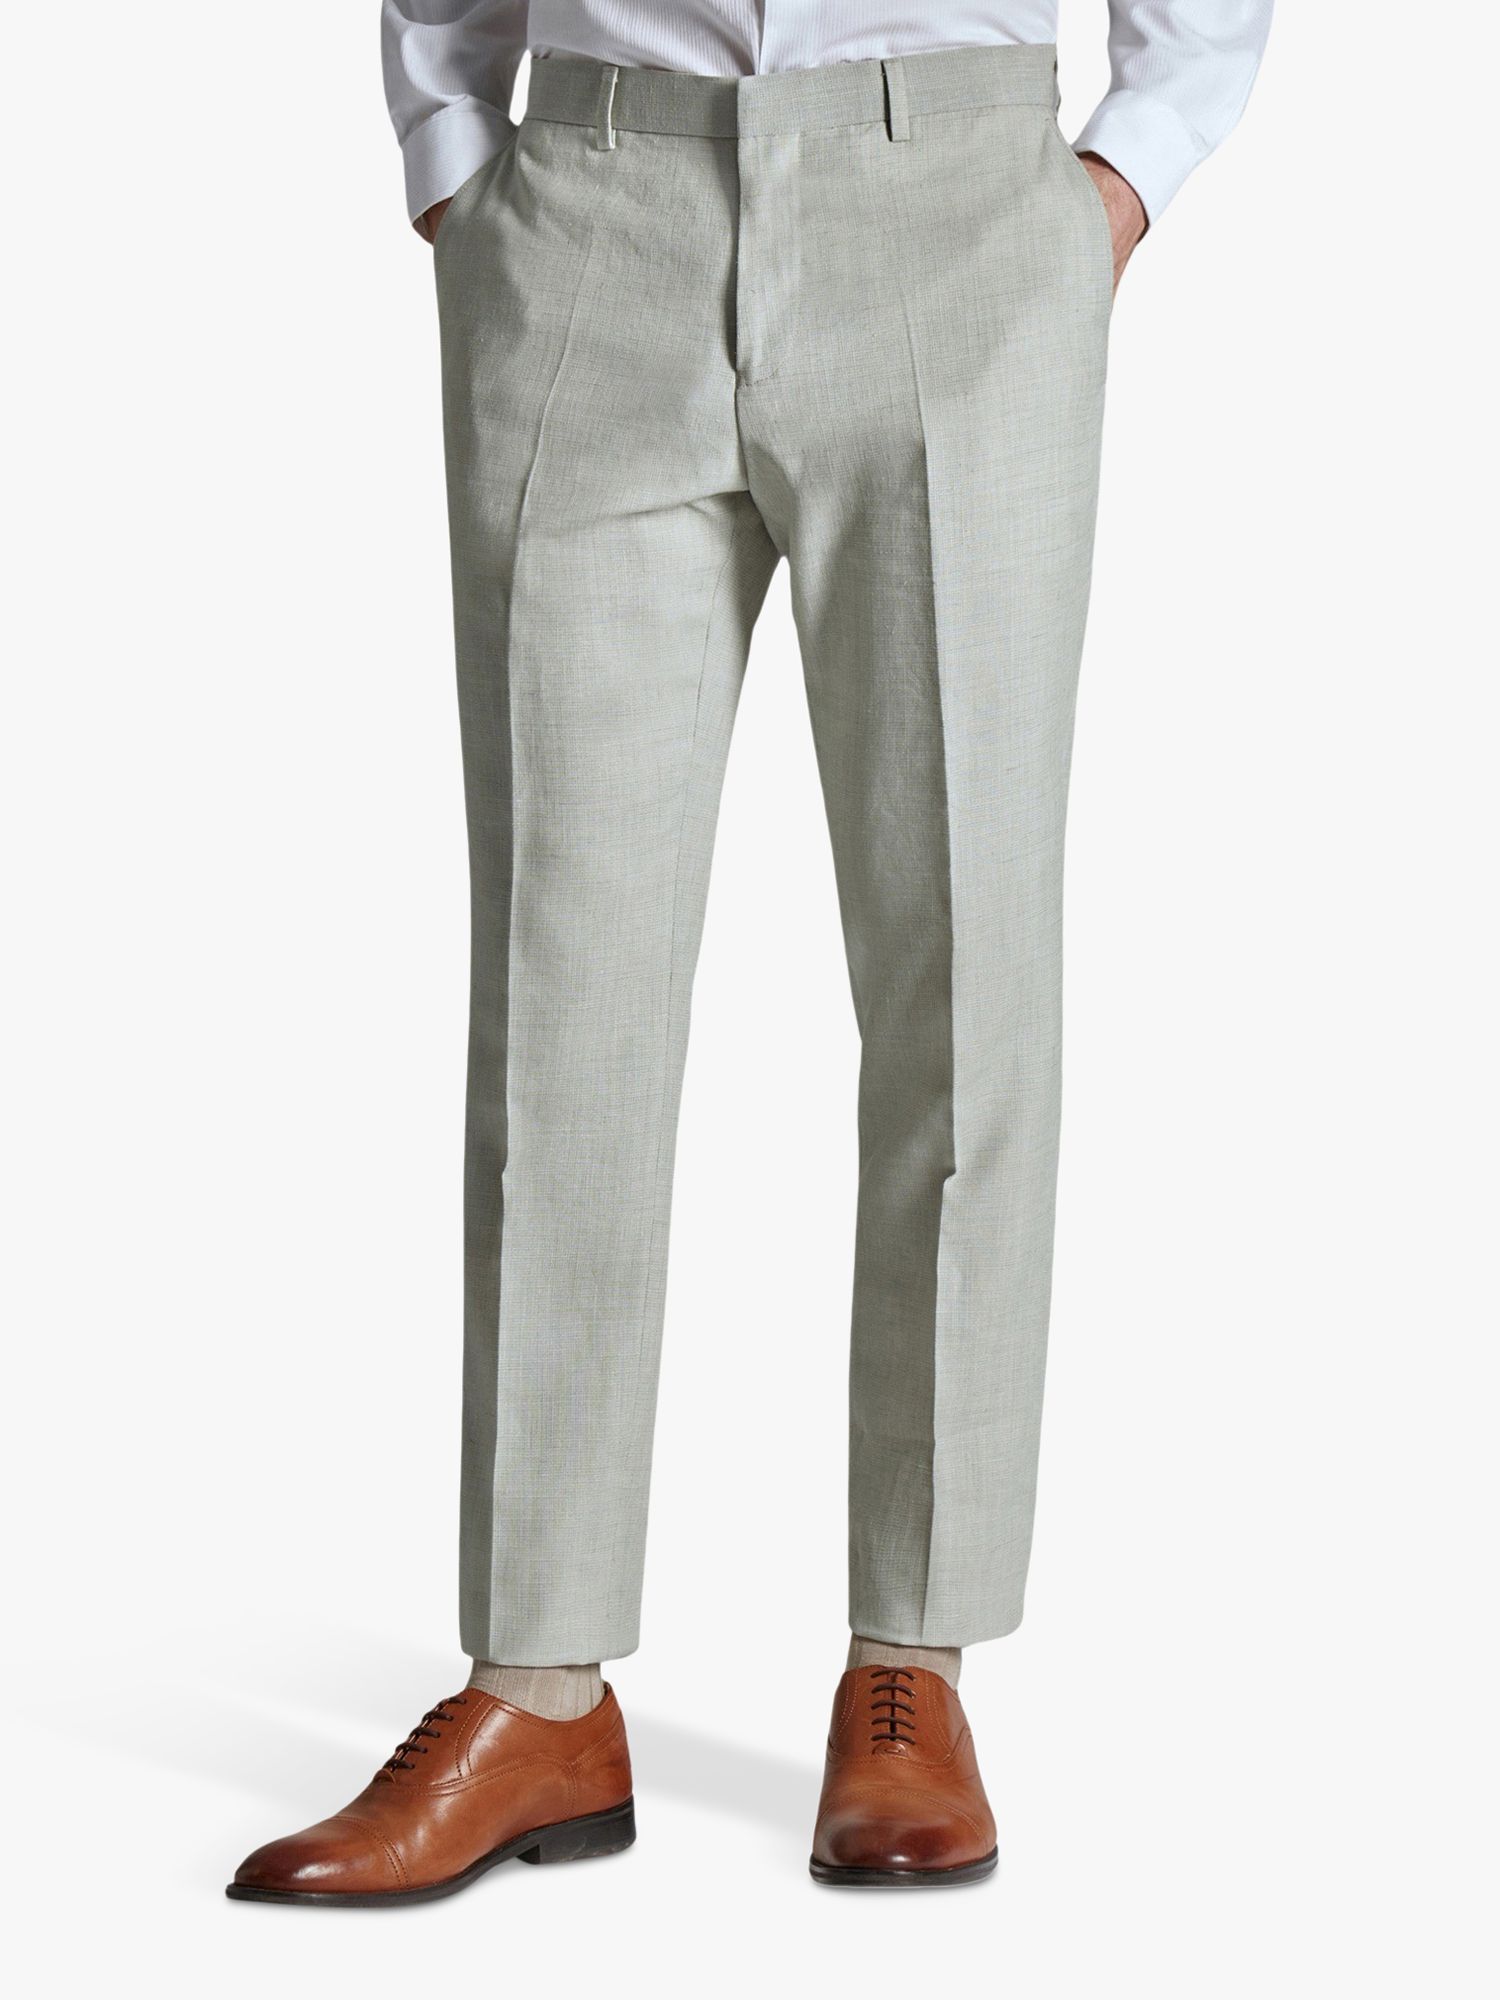 Slim Fit Taupe Matte Linen Trousers